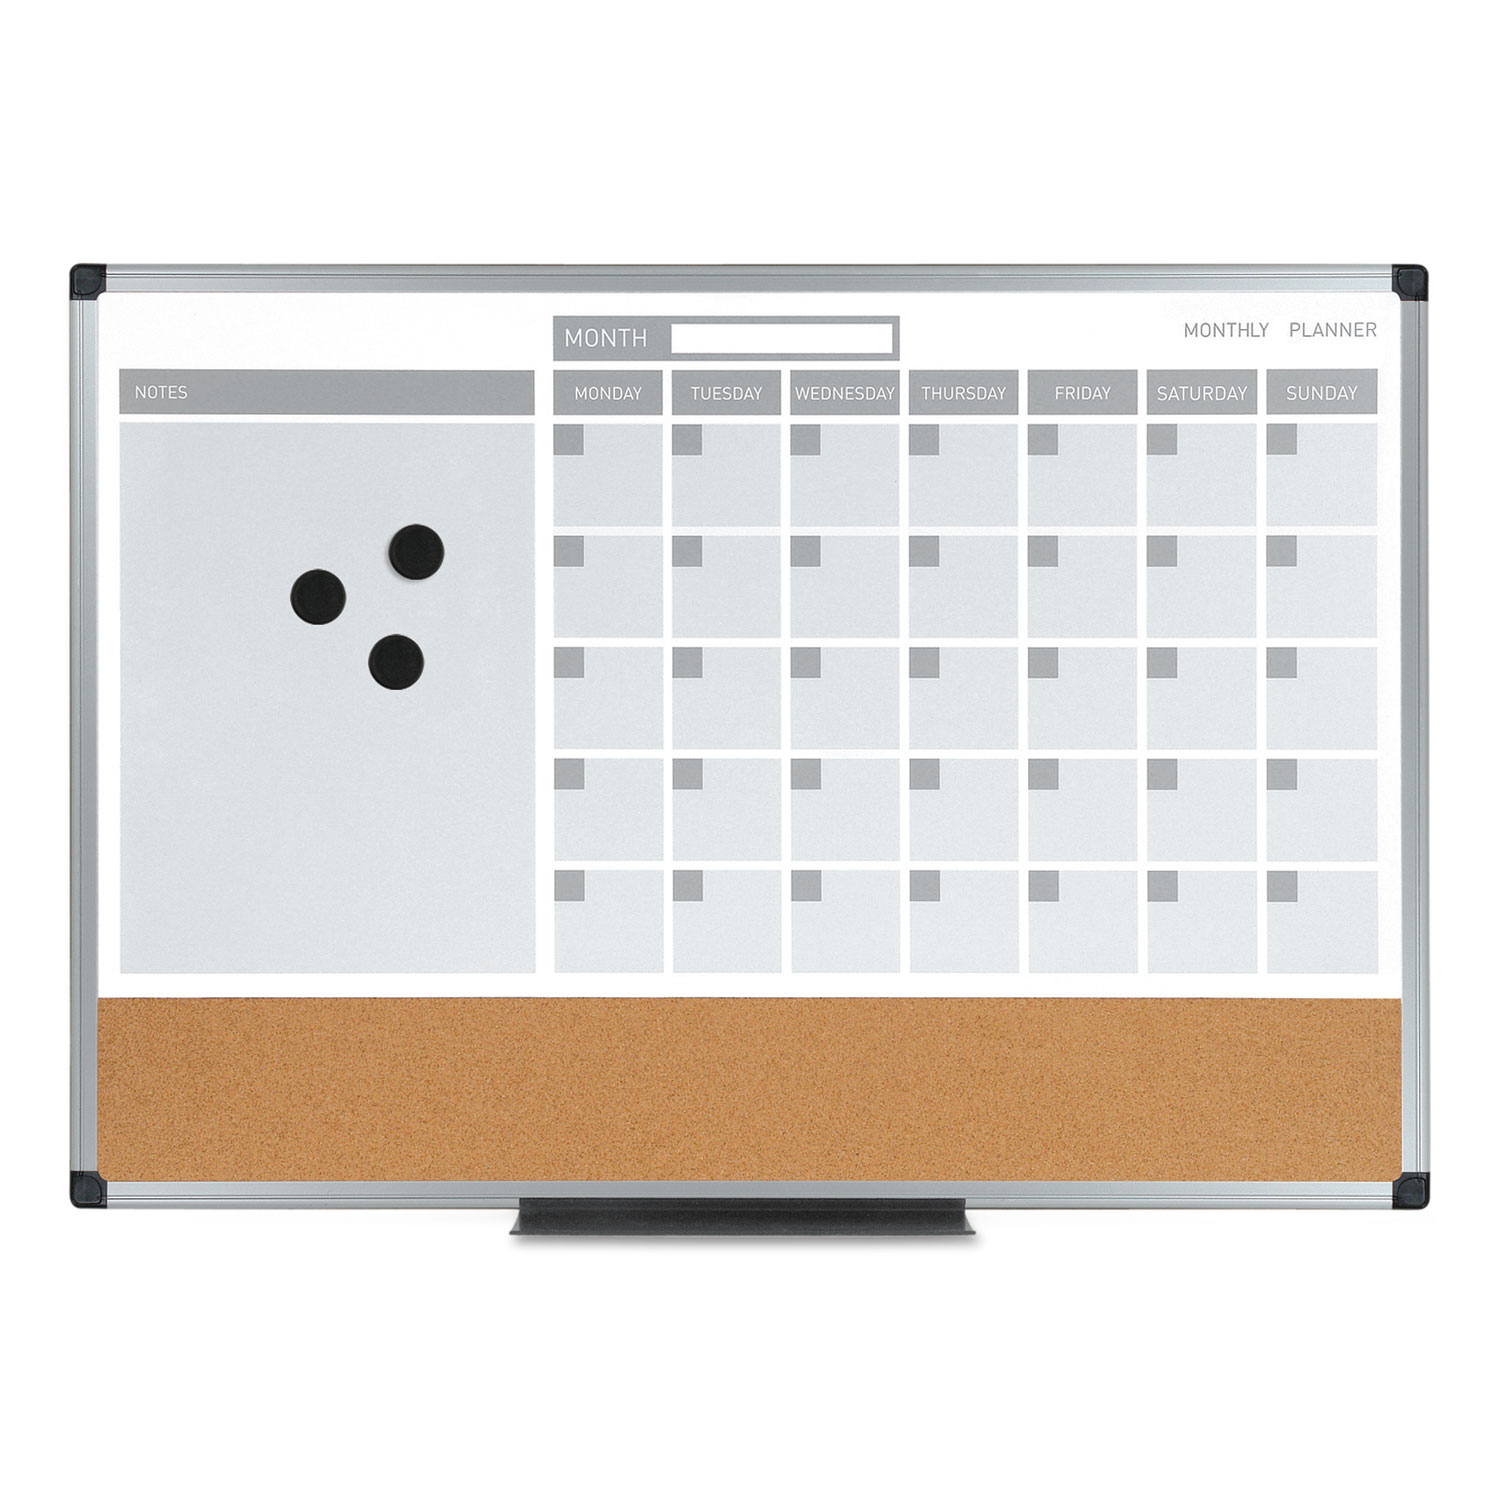  MasterVision MB0707186P 3-in-1 Calendar Planner Dry Erase Board, 36 x 24, Silver Frame (BVCMB0707186P) 